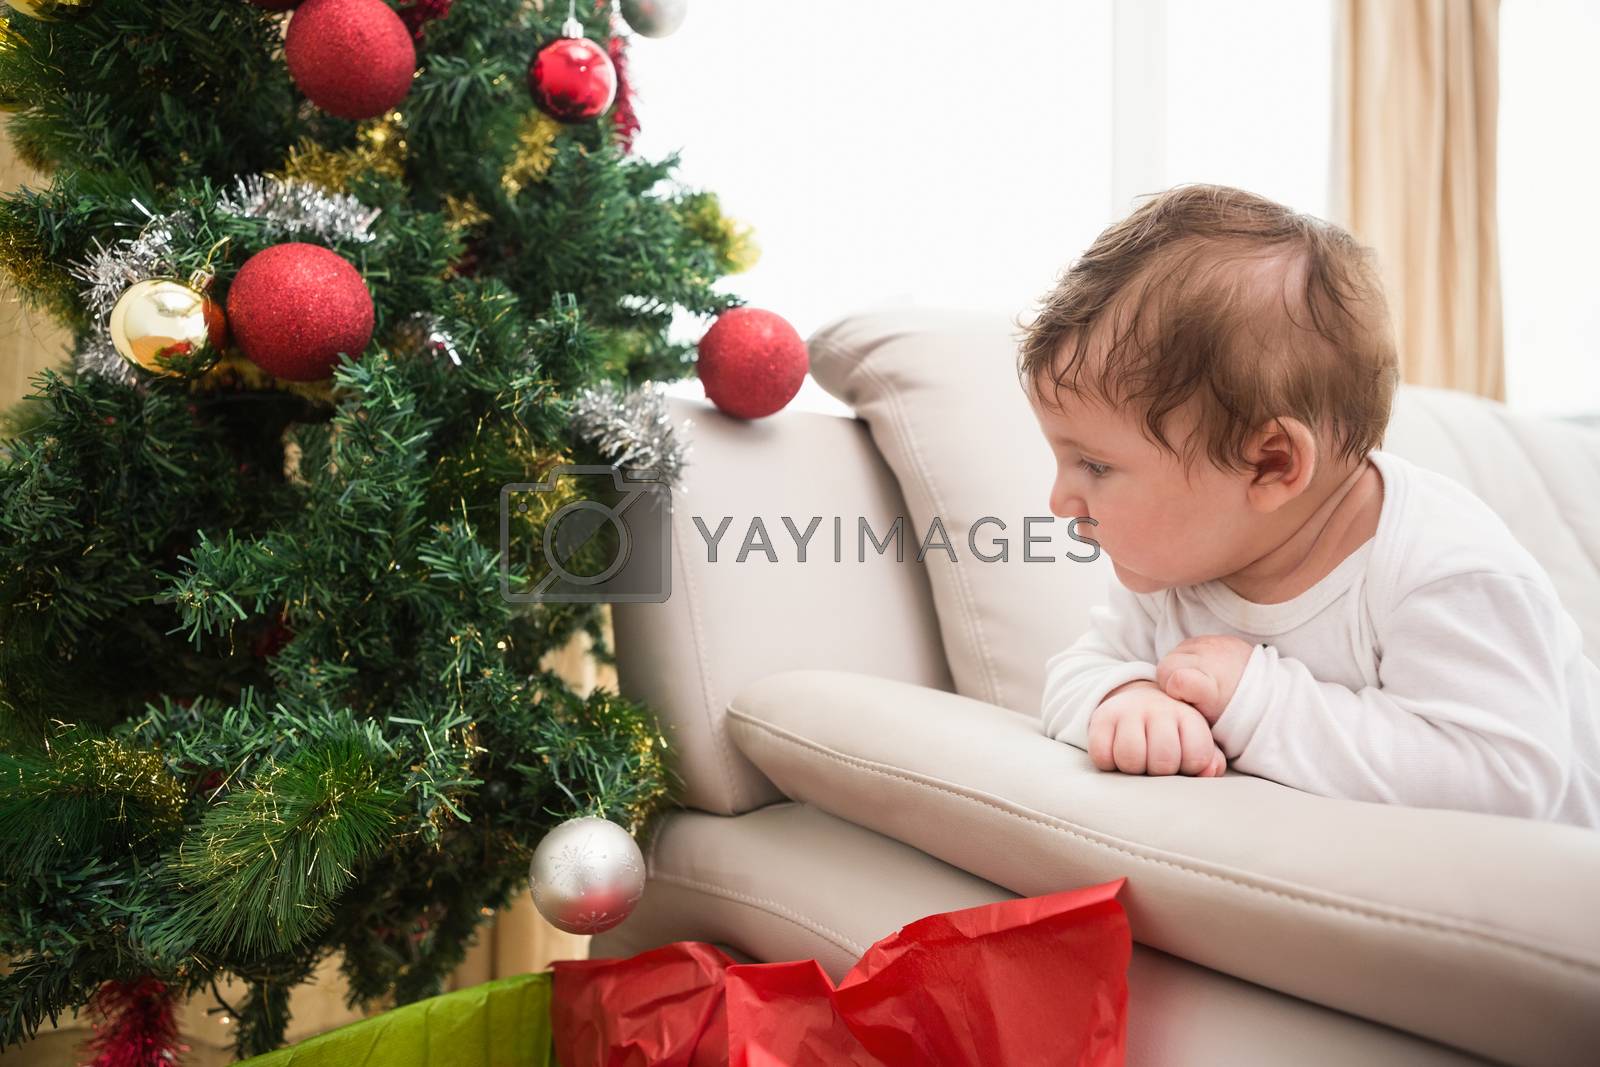 Royalty free image of Cute baby boy on couch at christmas by Wavebreakmedia